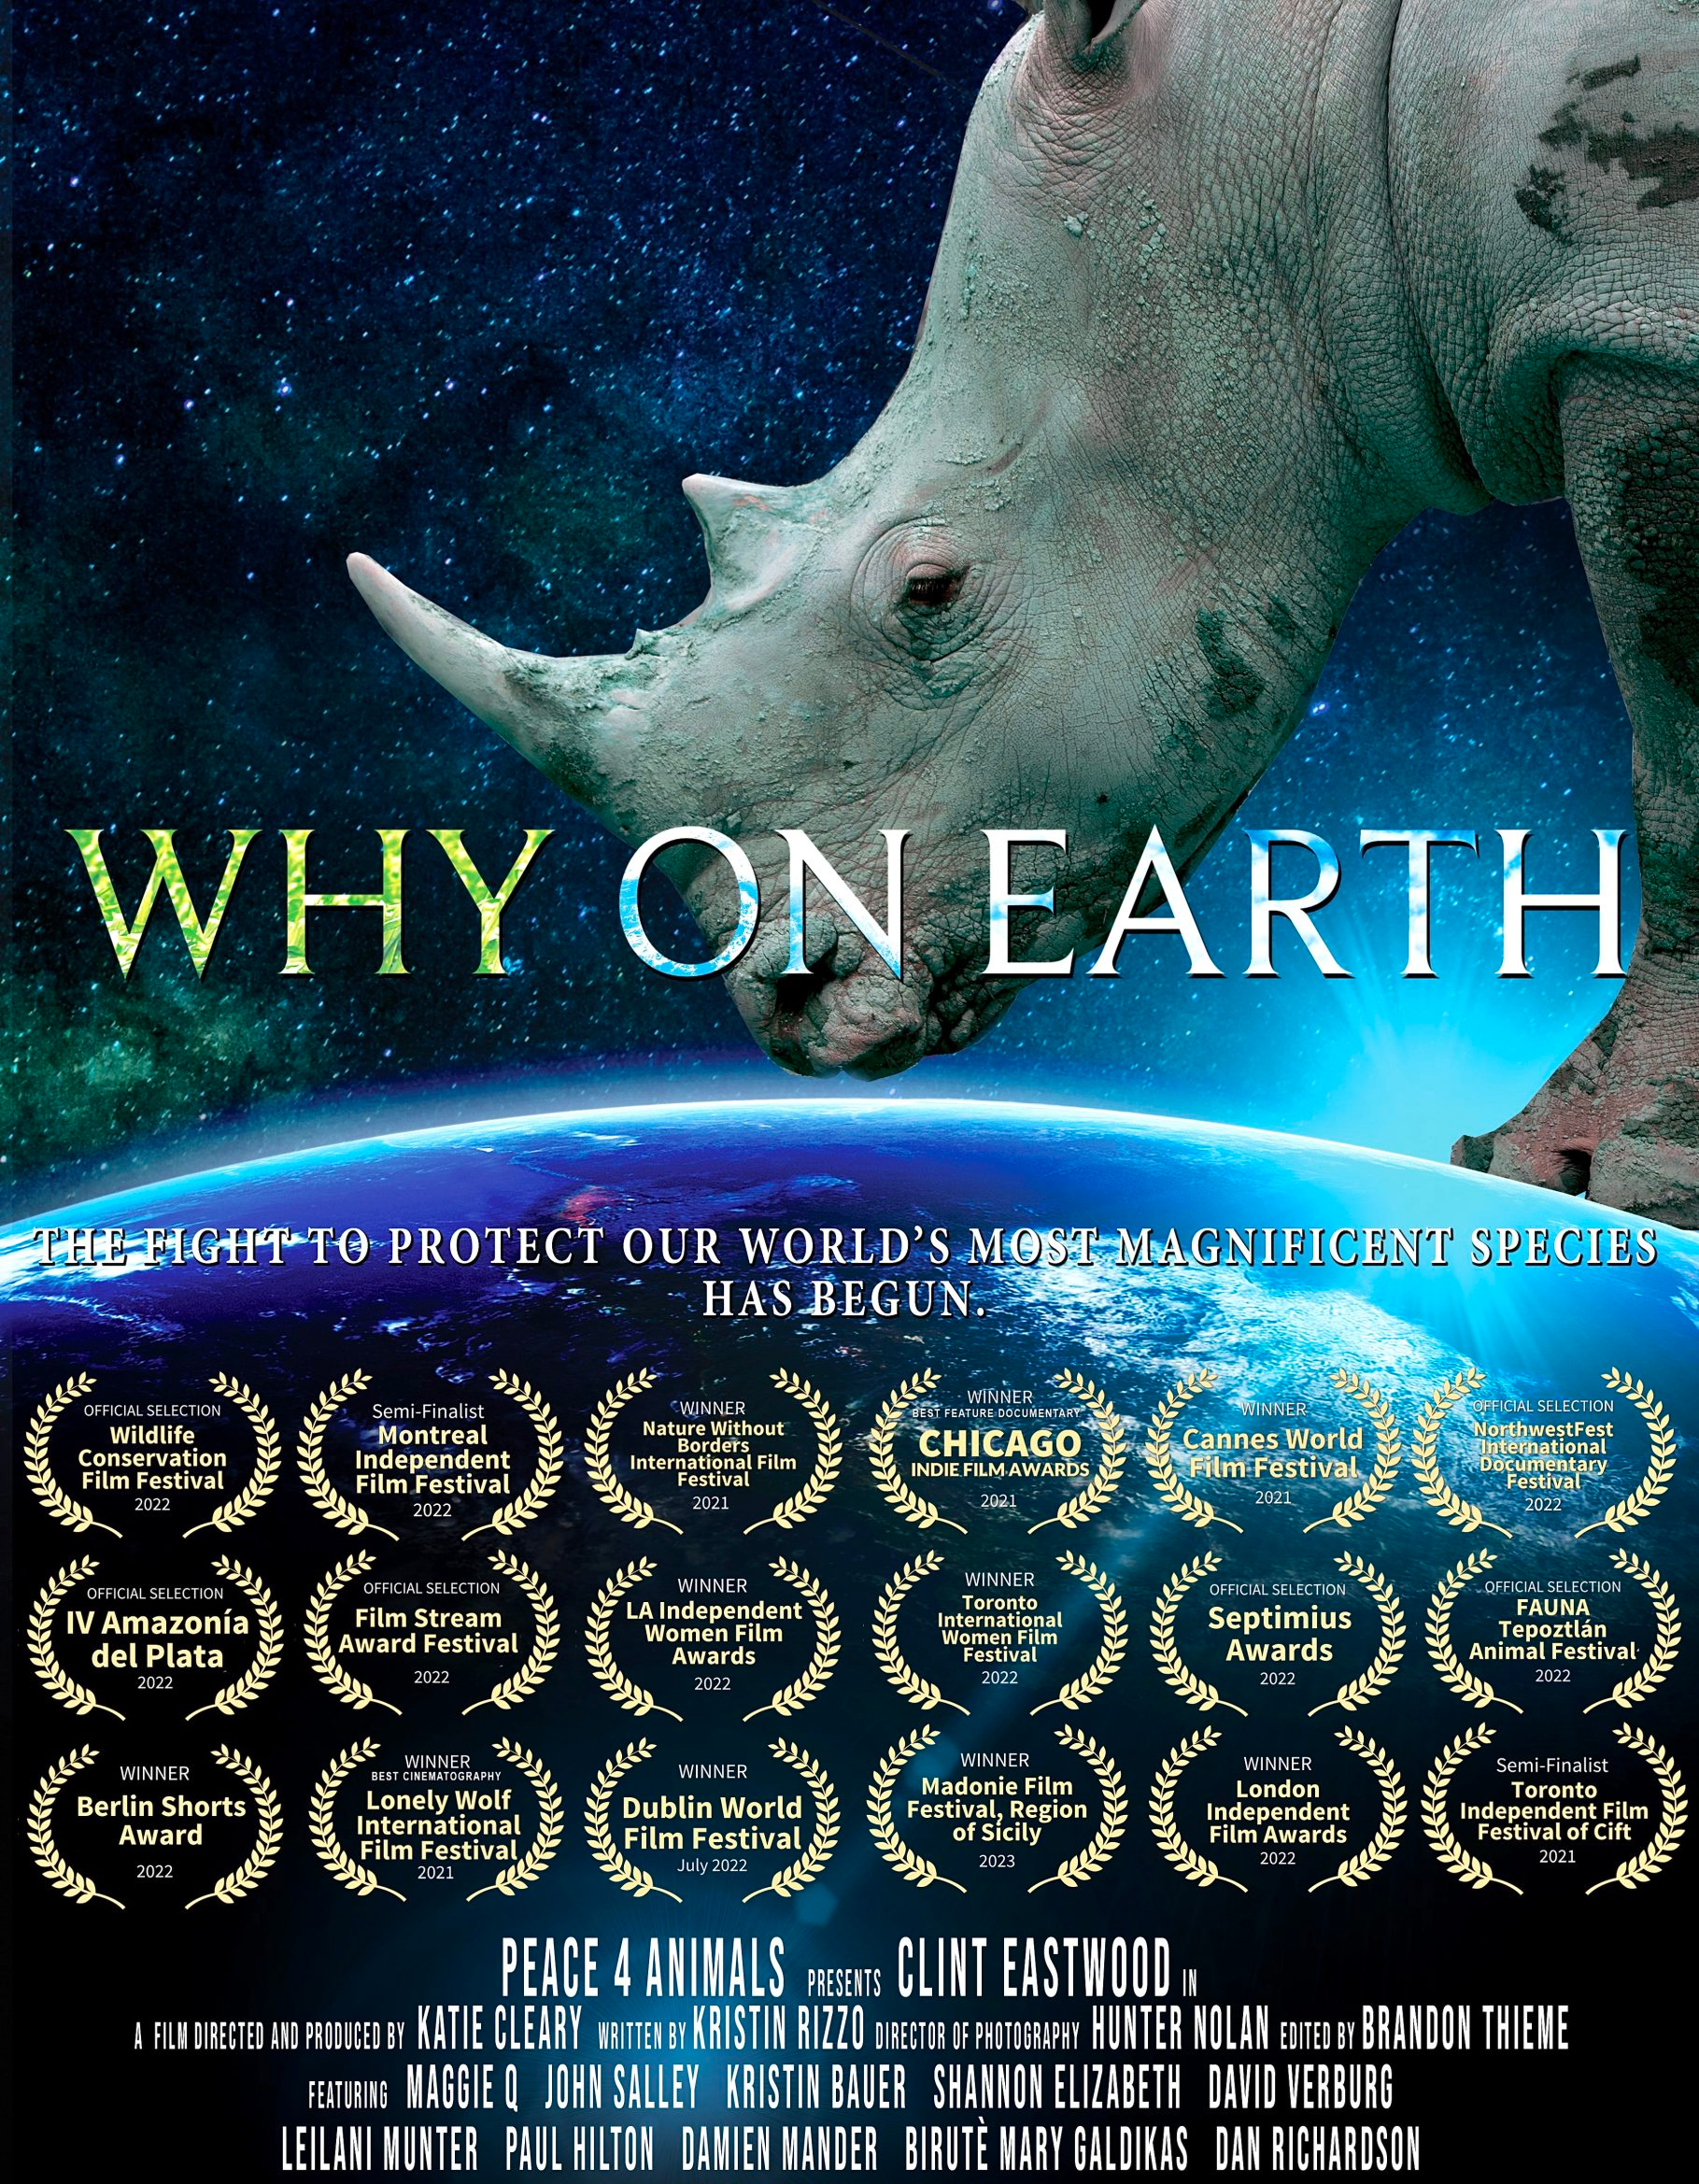 Why on Earth | Featuring Clint Eastwood and Katie Cleary – The Fight to  Protect the World's Most Magnificent Species has Begun